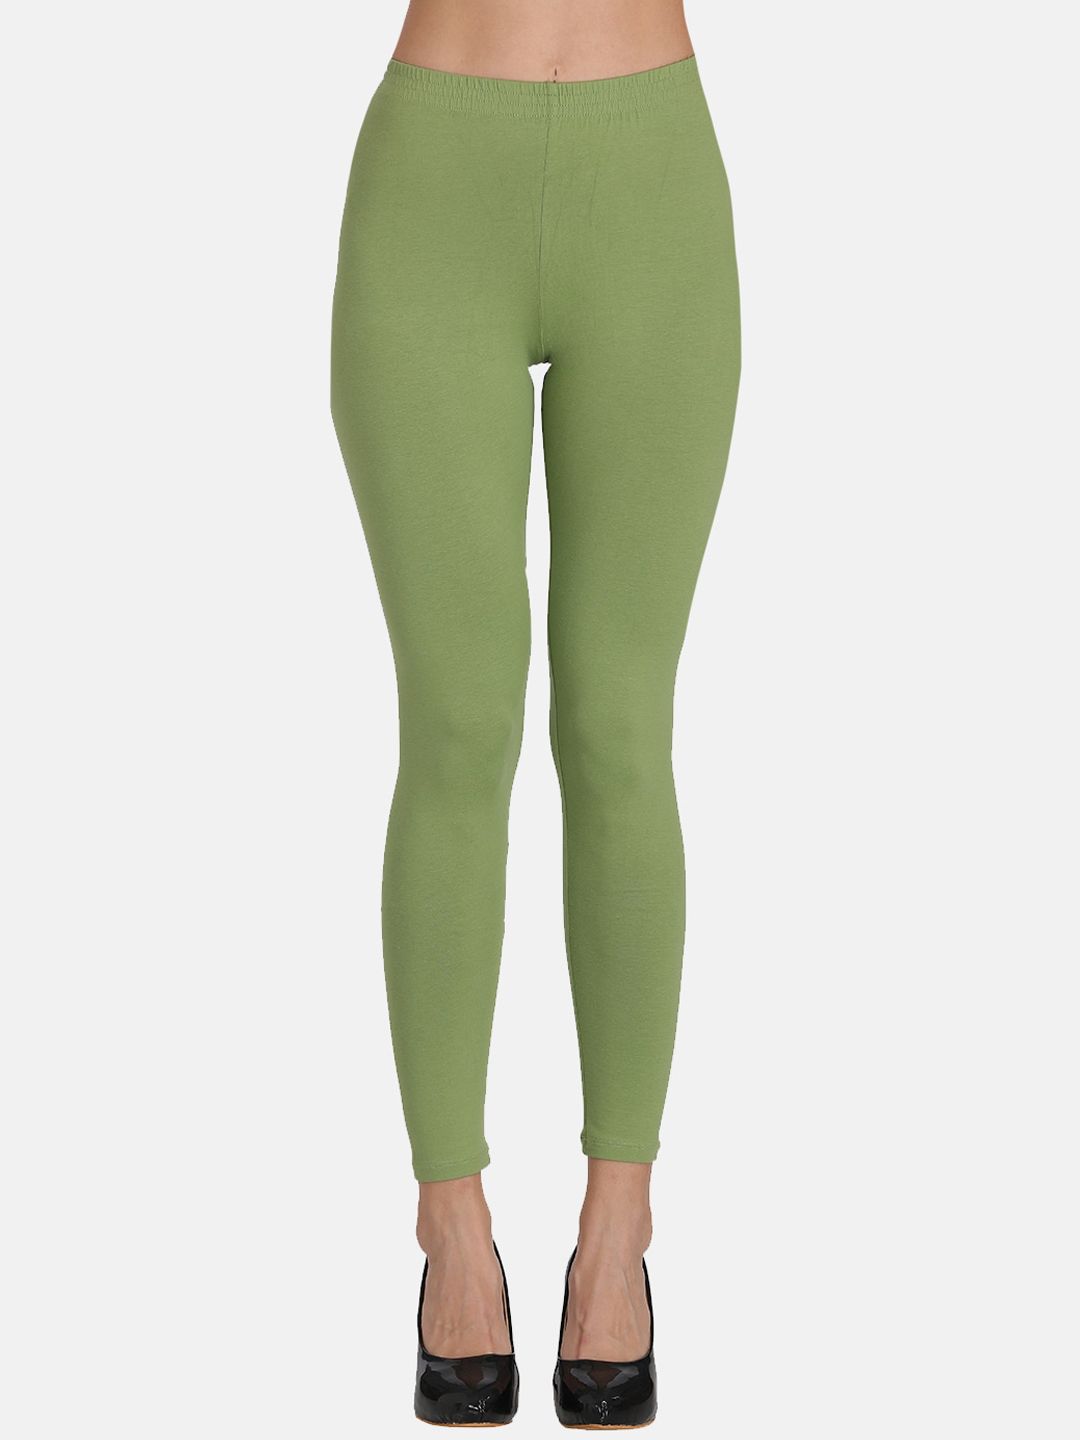 GROVERSONS Paris Beauty Women Olive Green Solid Ankle Length Leggings Price in India